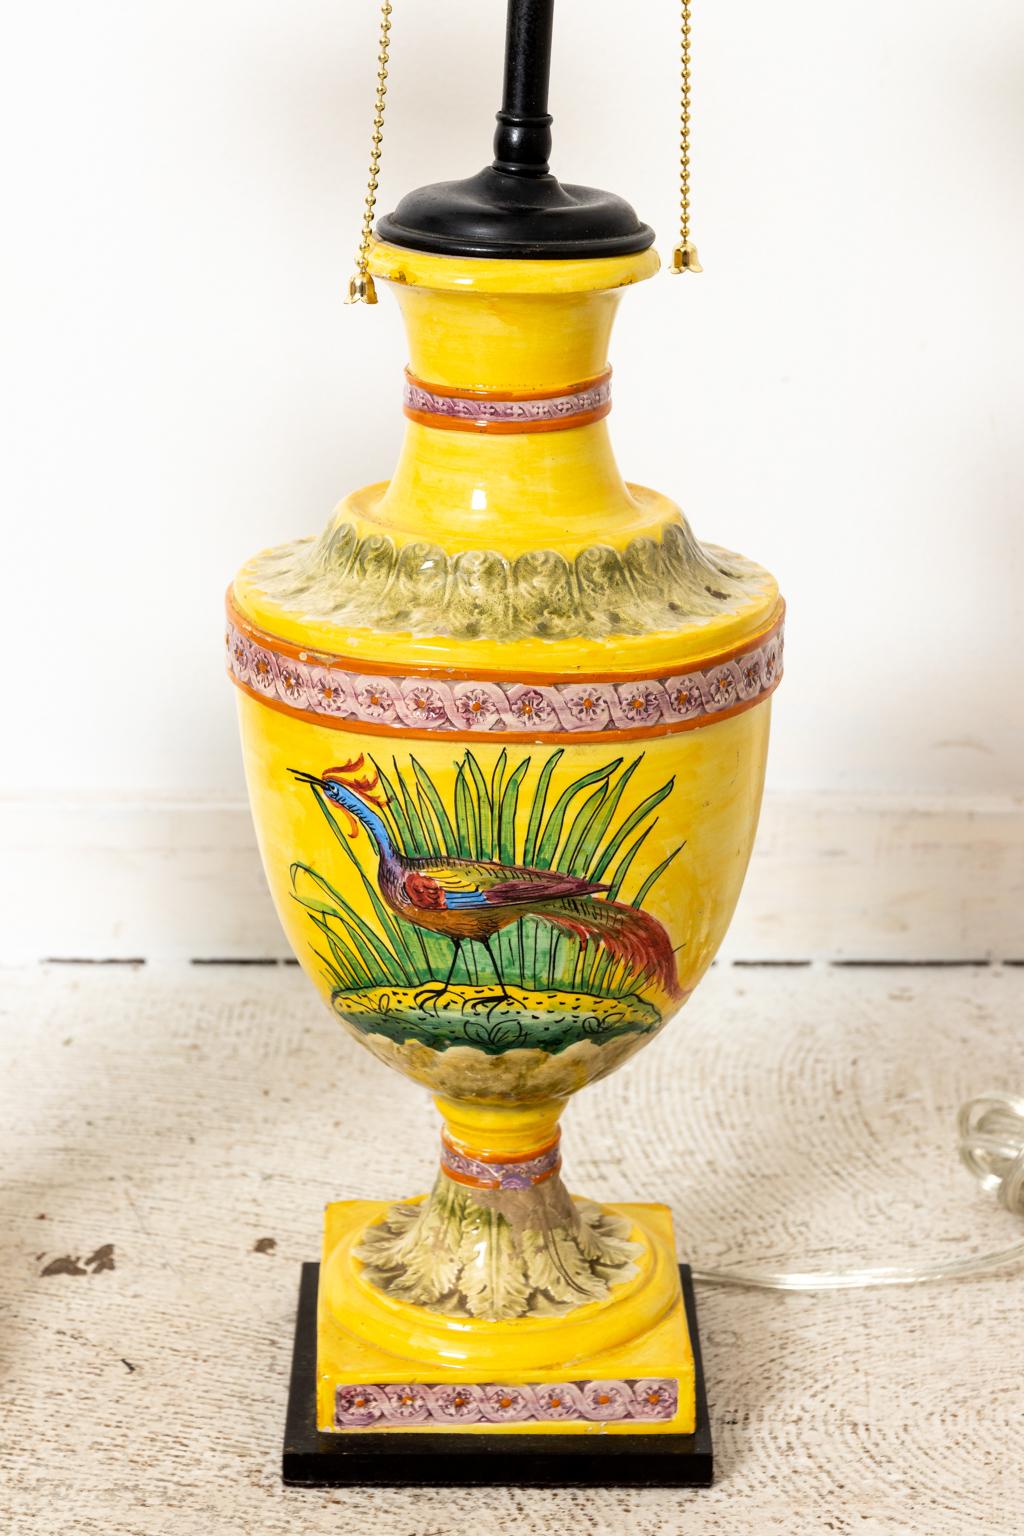 Circa 1910-1915 pair of urn form yellow glazed Majolica lamps with painted foliage and guilloche trim. The lamps are further illustrated by a large central panel of a multi-colored bird. Please note of wear consistent with age including repairs to